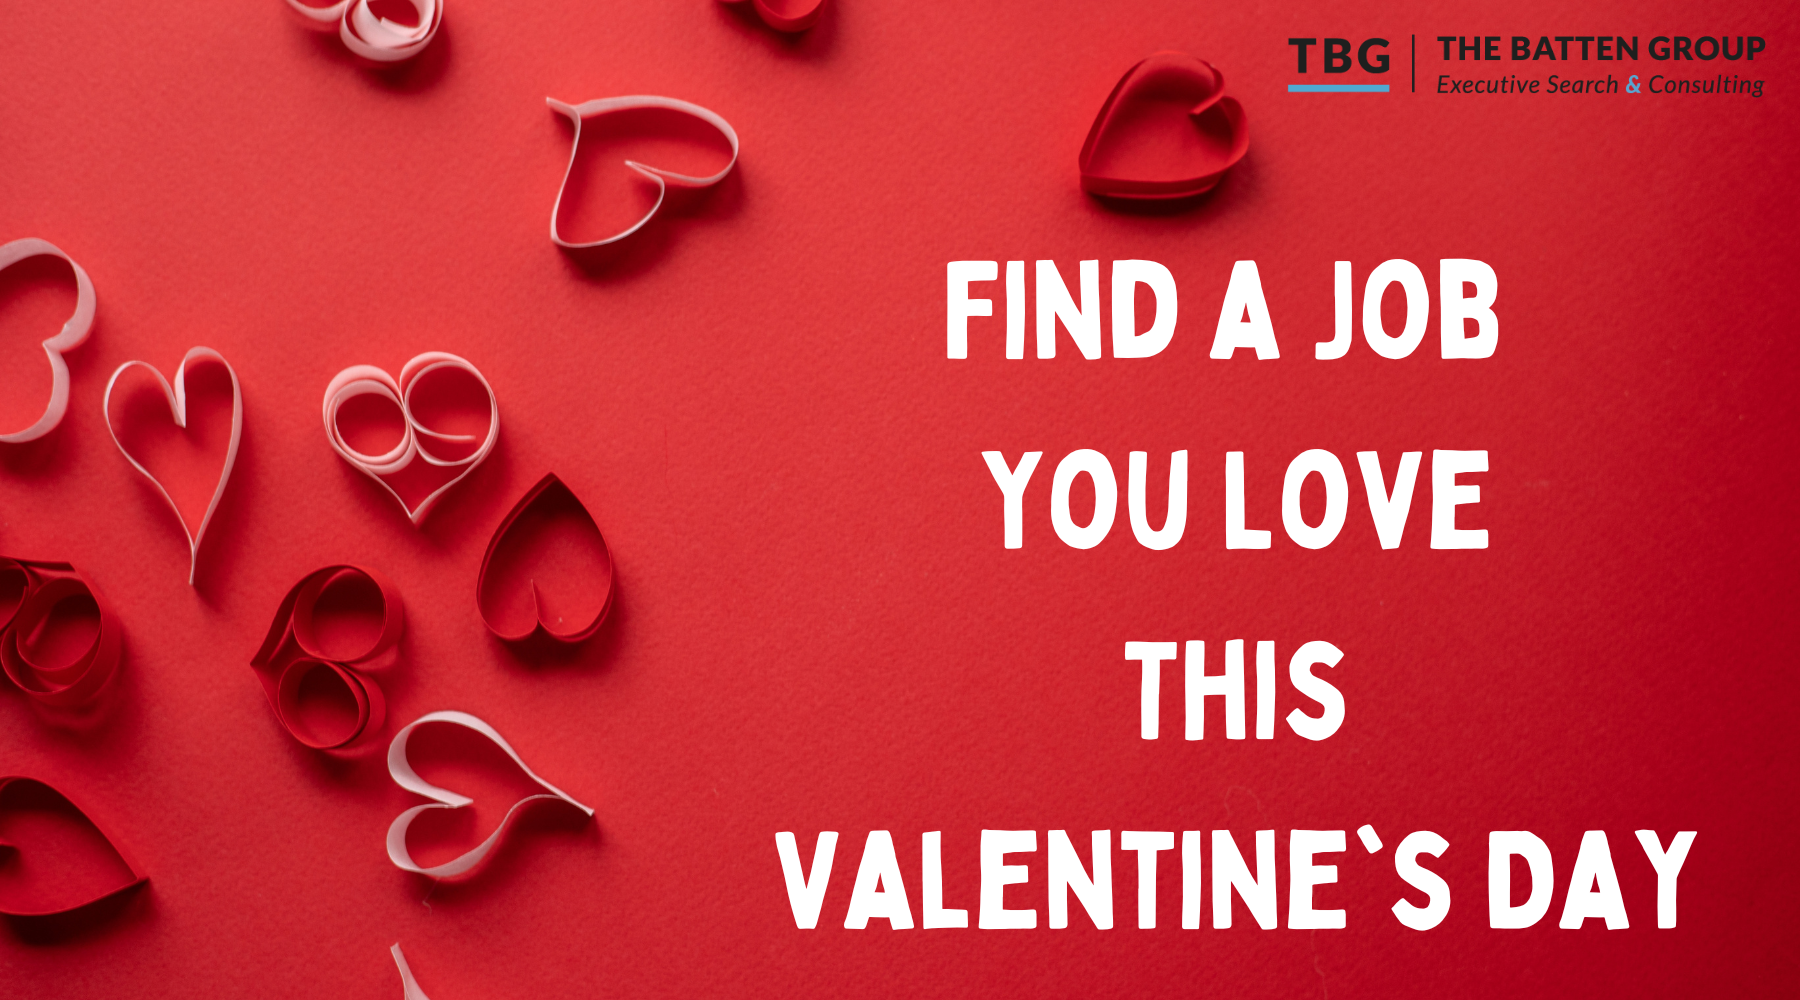 Find a Job You Love This Valentine's Day